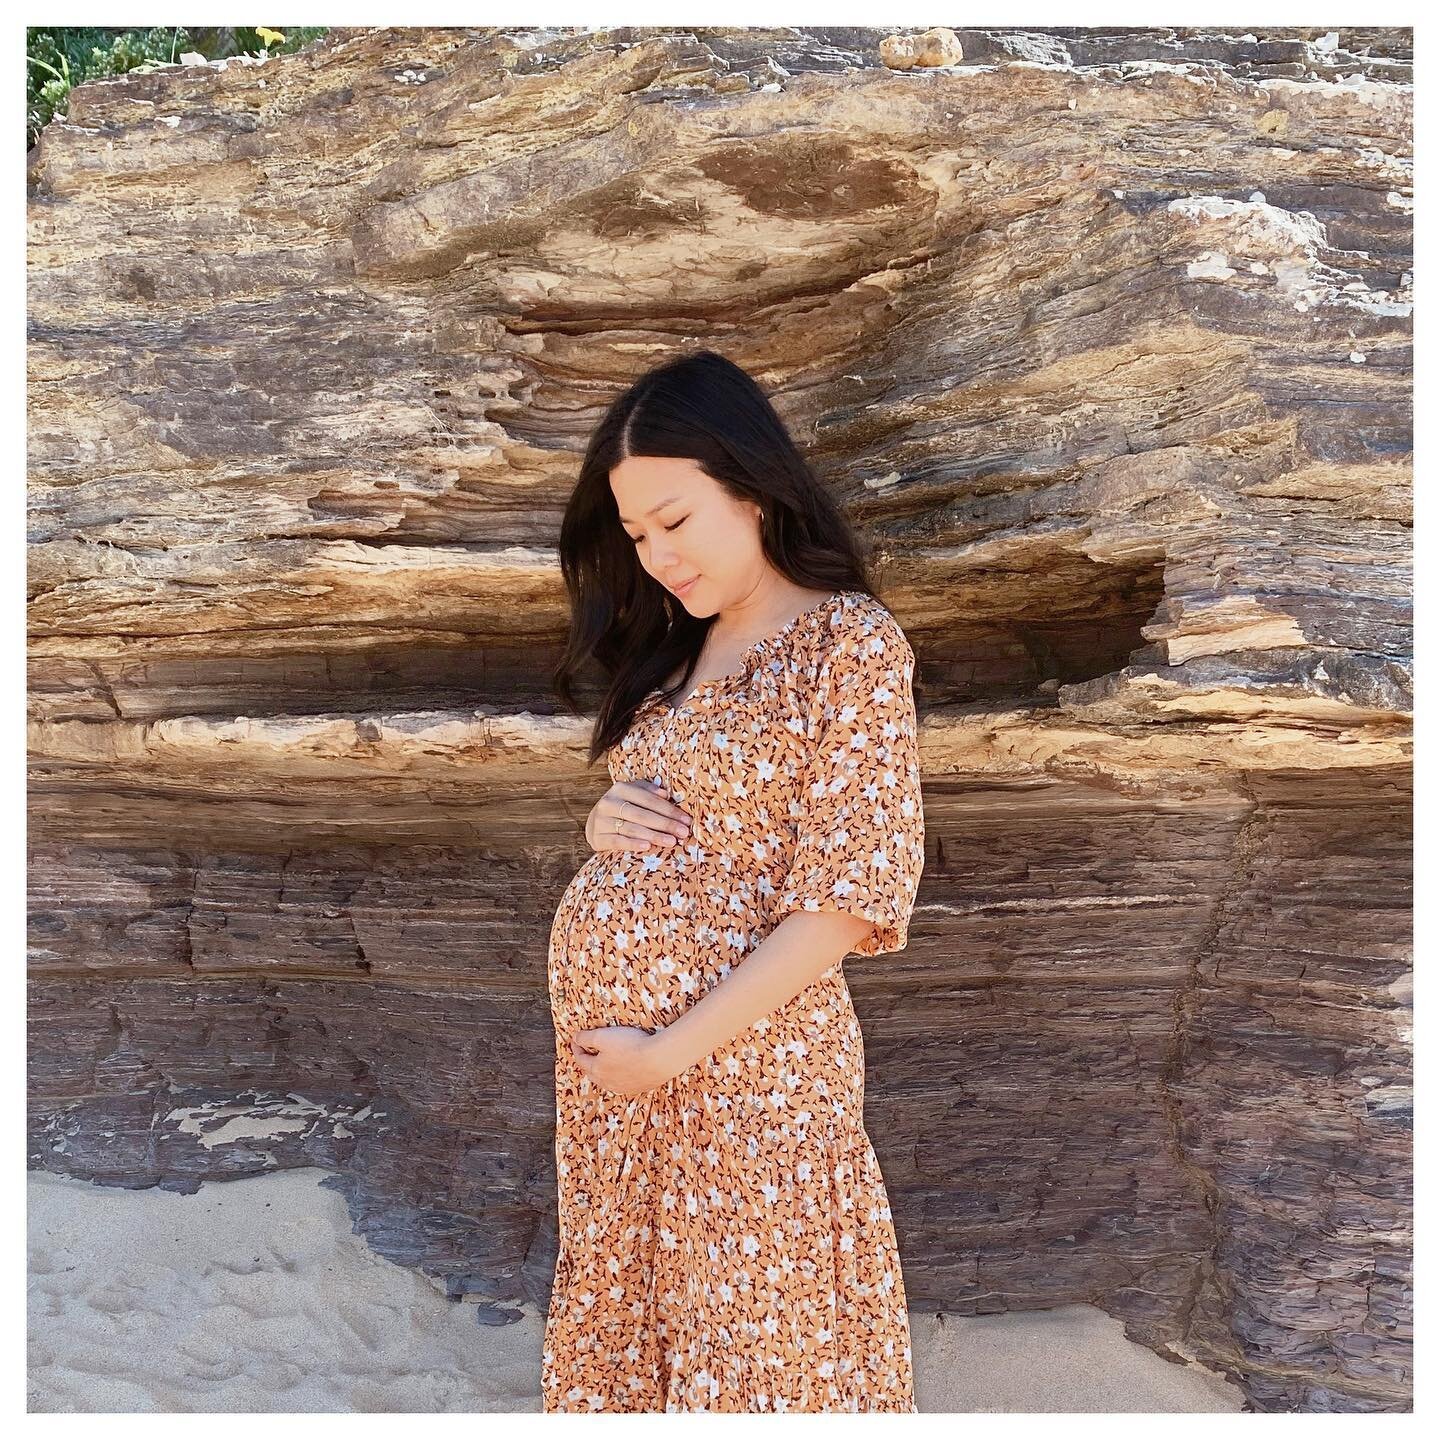 And just like that, we are just a few weeks away from meeting our sunshine girl! Pregnancy has been a wild and beautiful adventure and I can honestly say I&rsquo;ve loved every minute of carrying, nourishing, growing and housing this little life. Wha